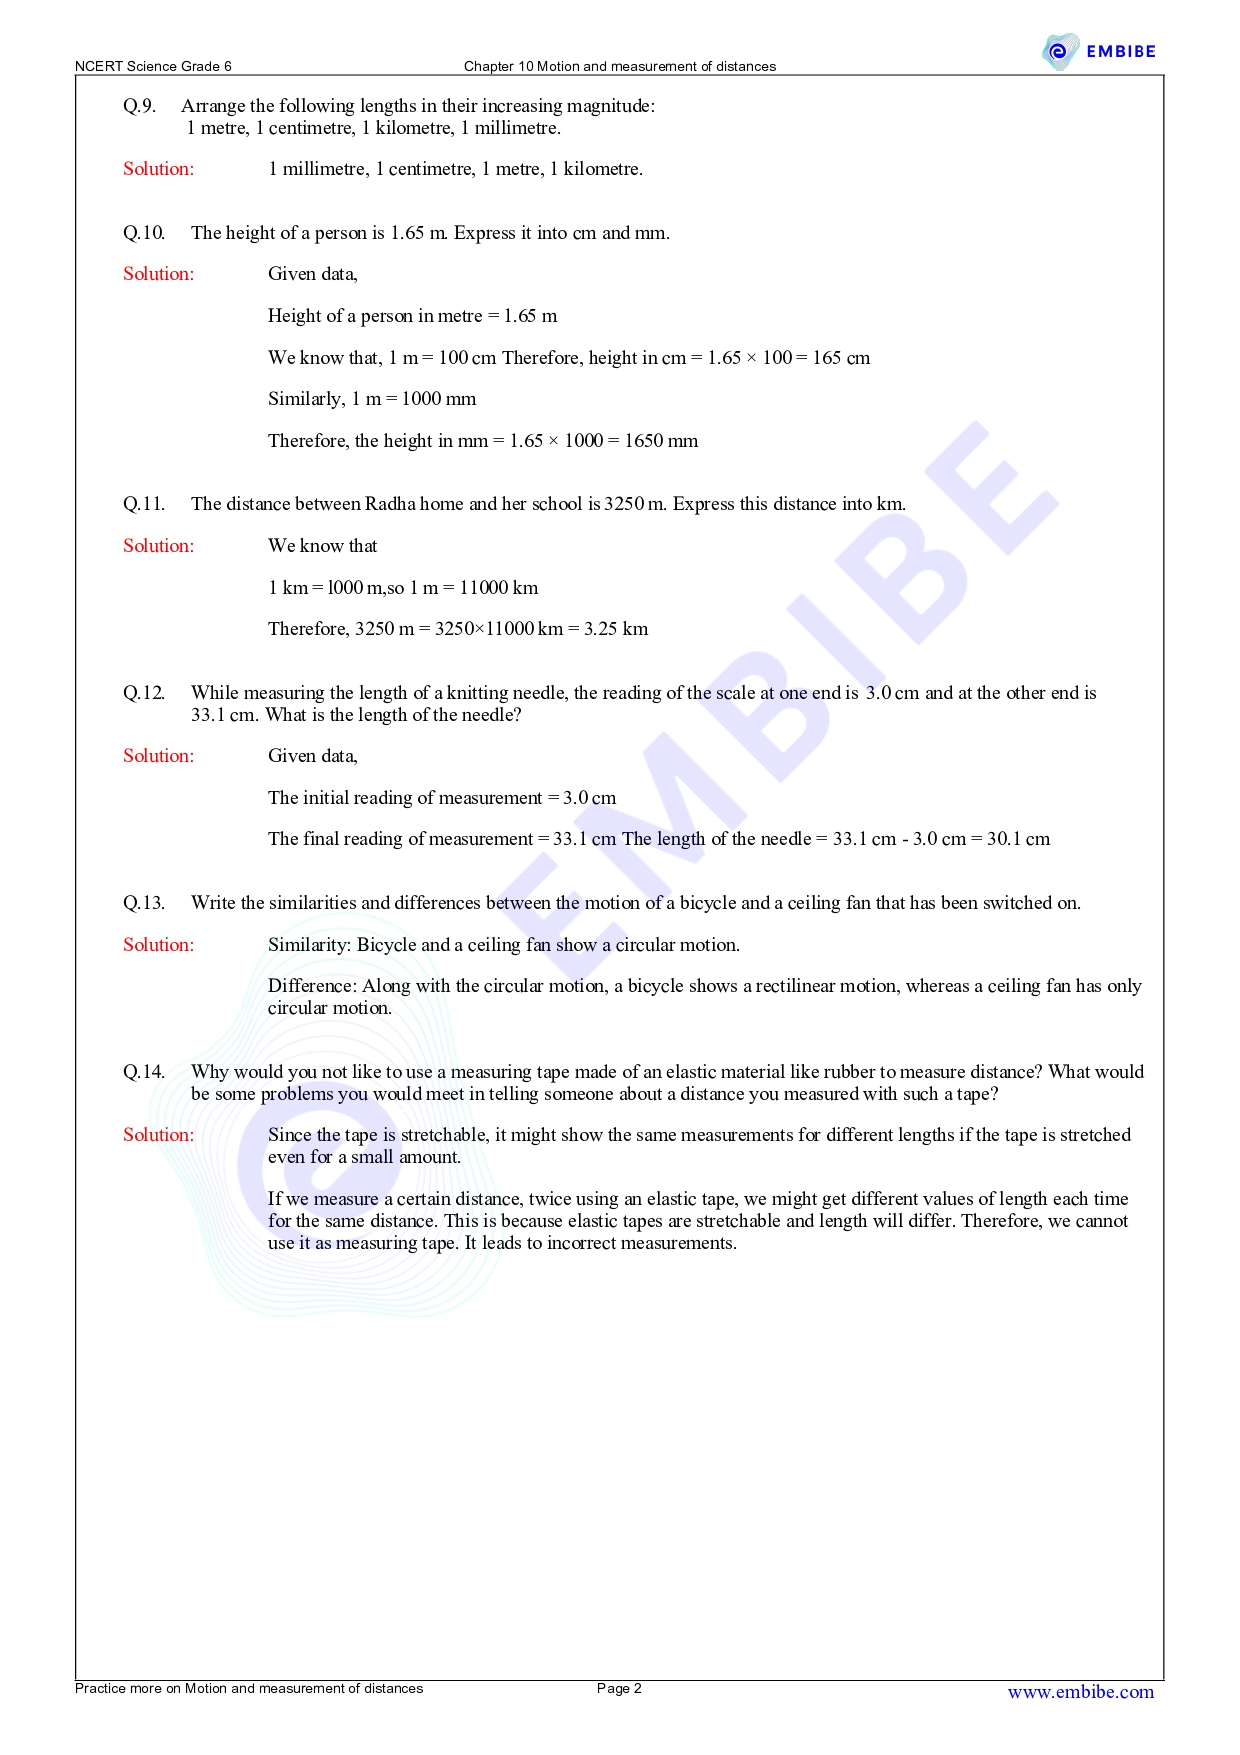 NCERT Solutions for Class 6 Science Chapter 10